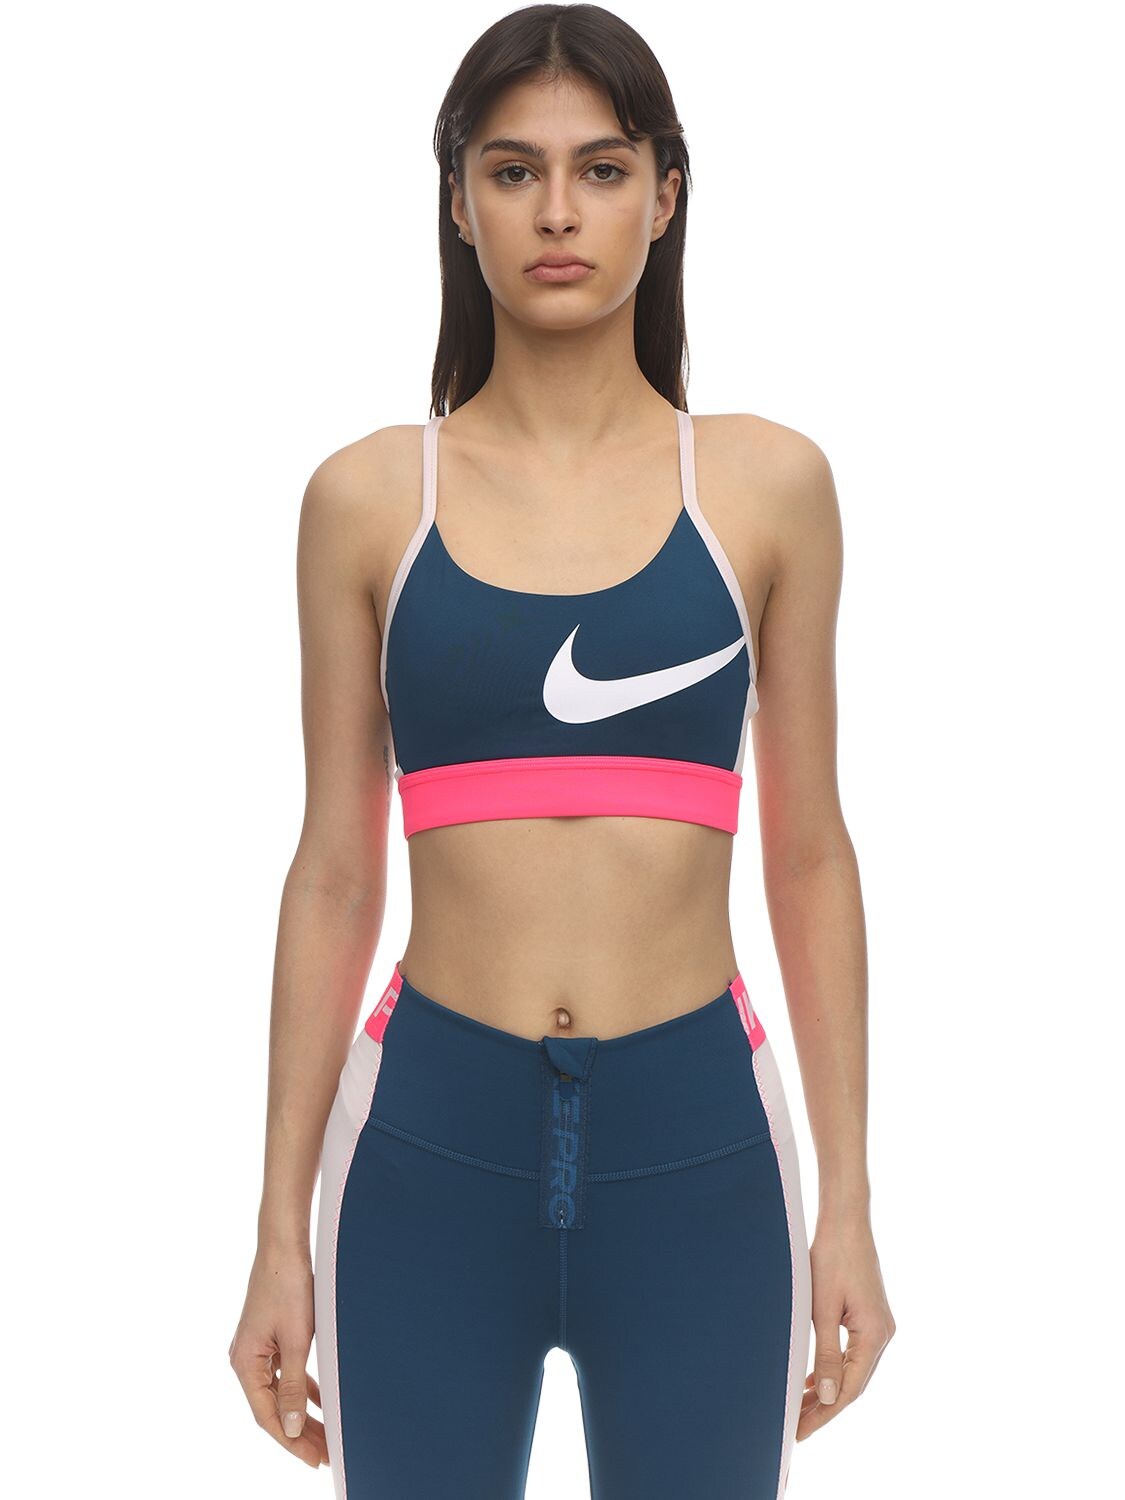 Nike Icon Clash Womens Light Support Sports Bra In Bluepink Modesens 